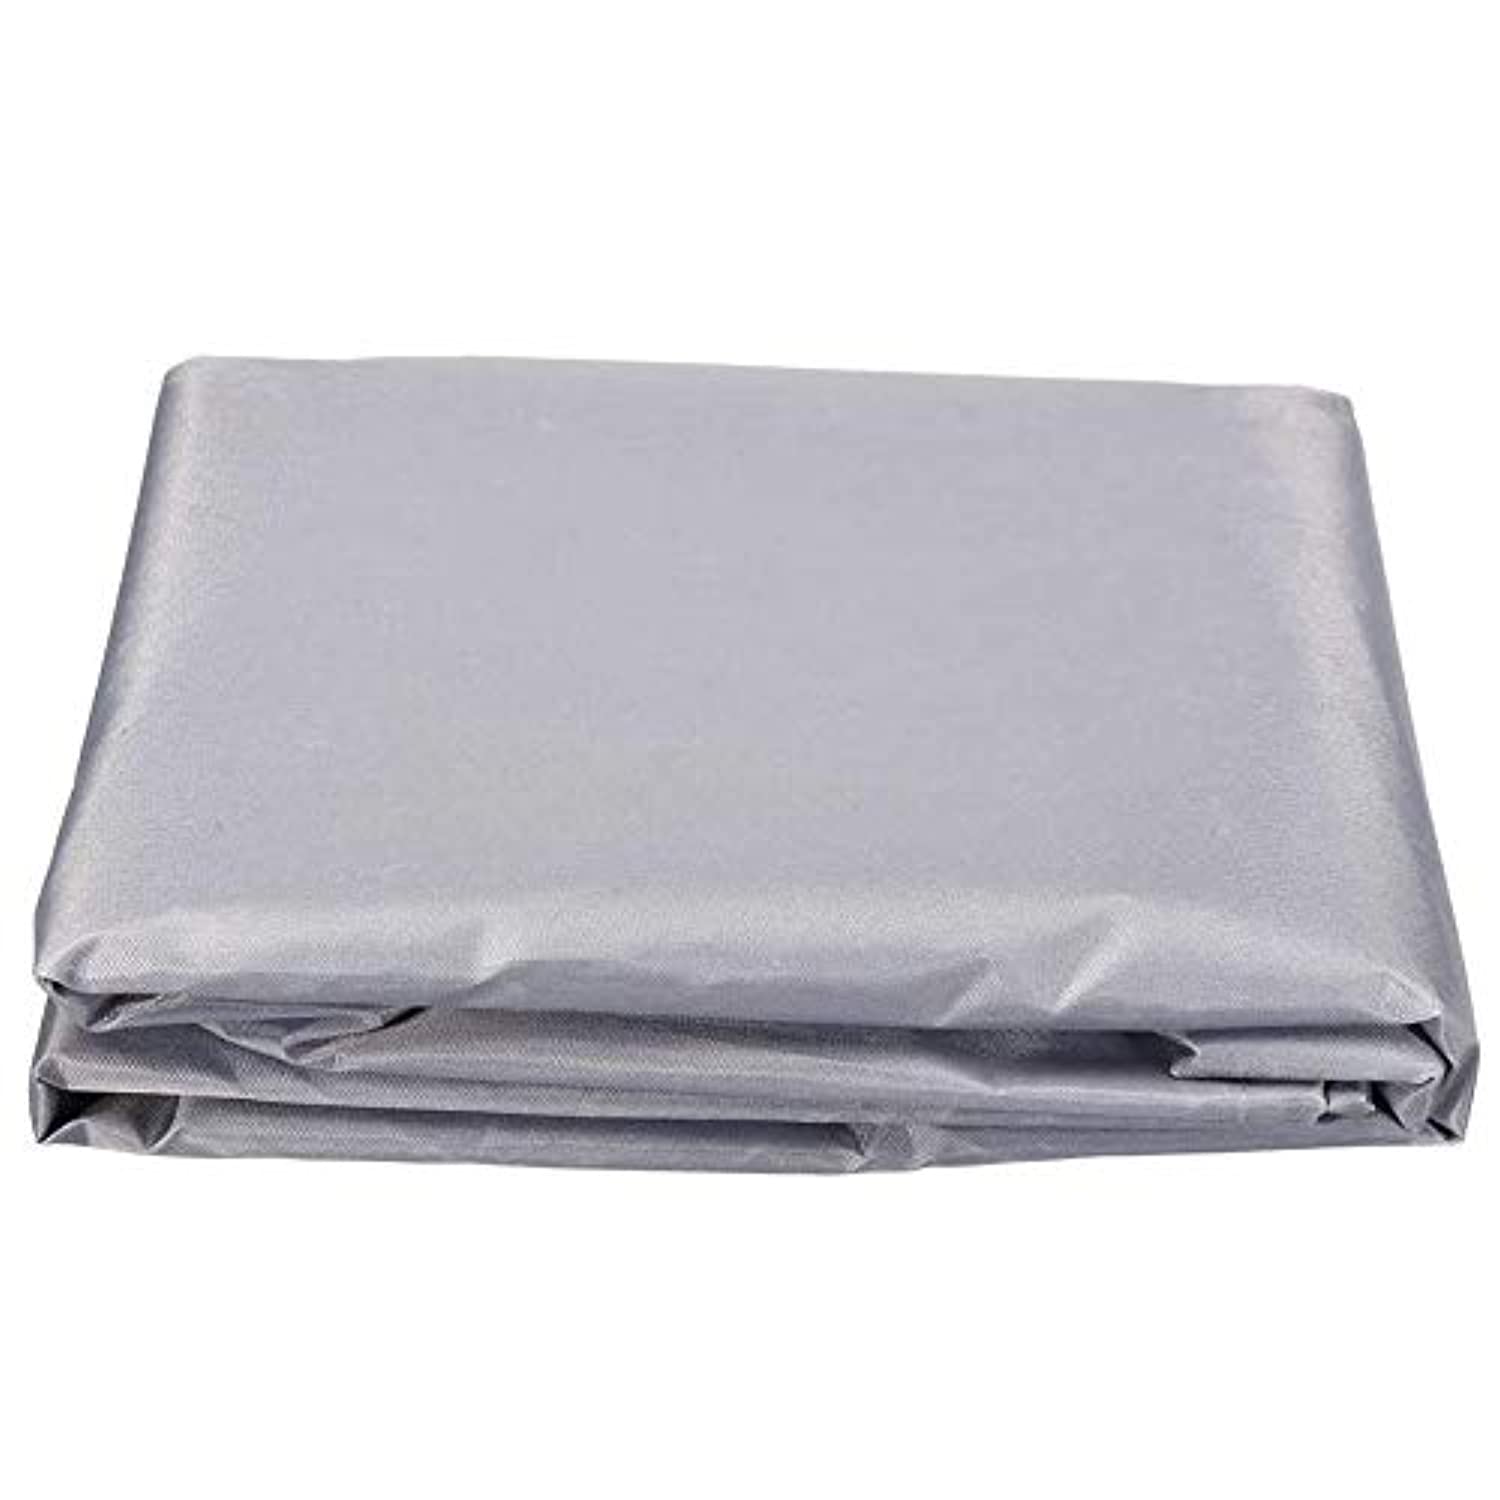 RIYIFER Protective Exercise Treadmills Cover, Treadmill Cover Non-Folding Aluminum Film + Cotton Material for Indoor and Outdoor Using,Gray,S